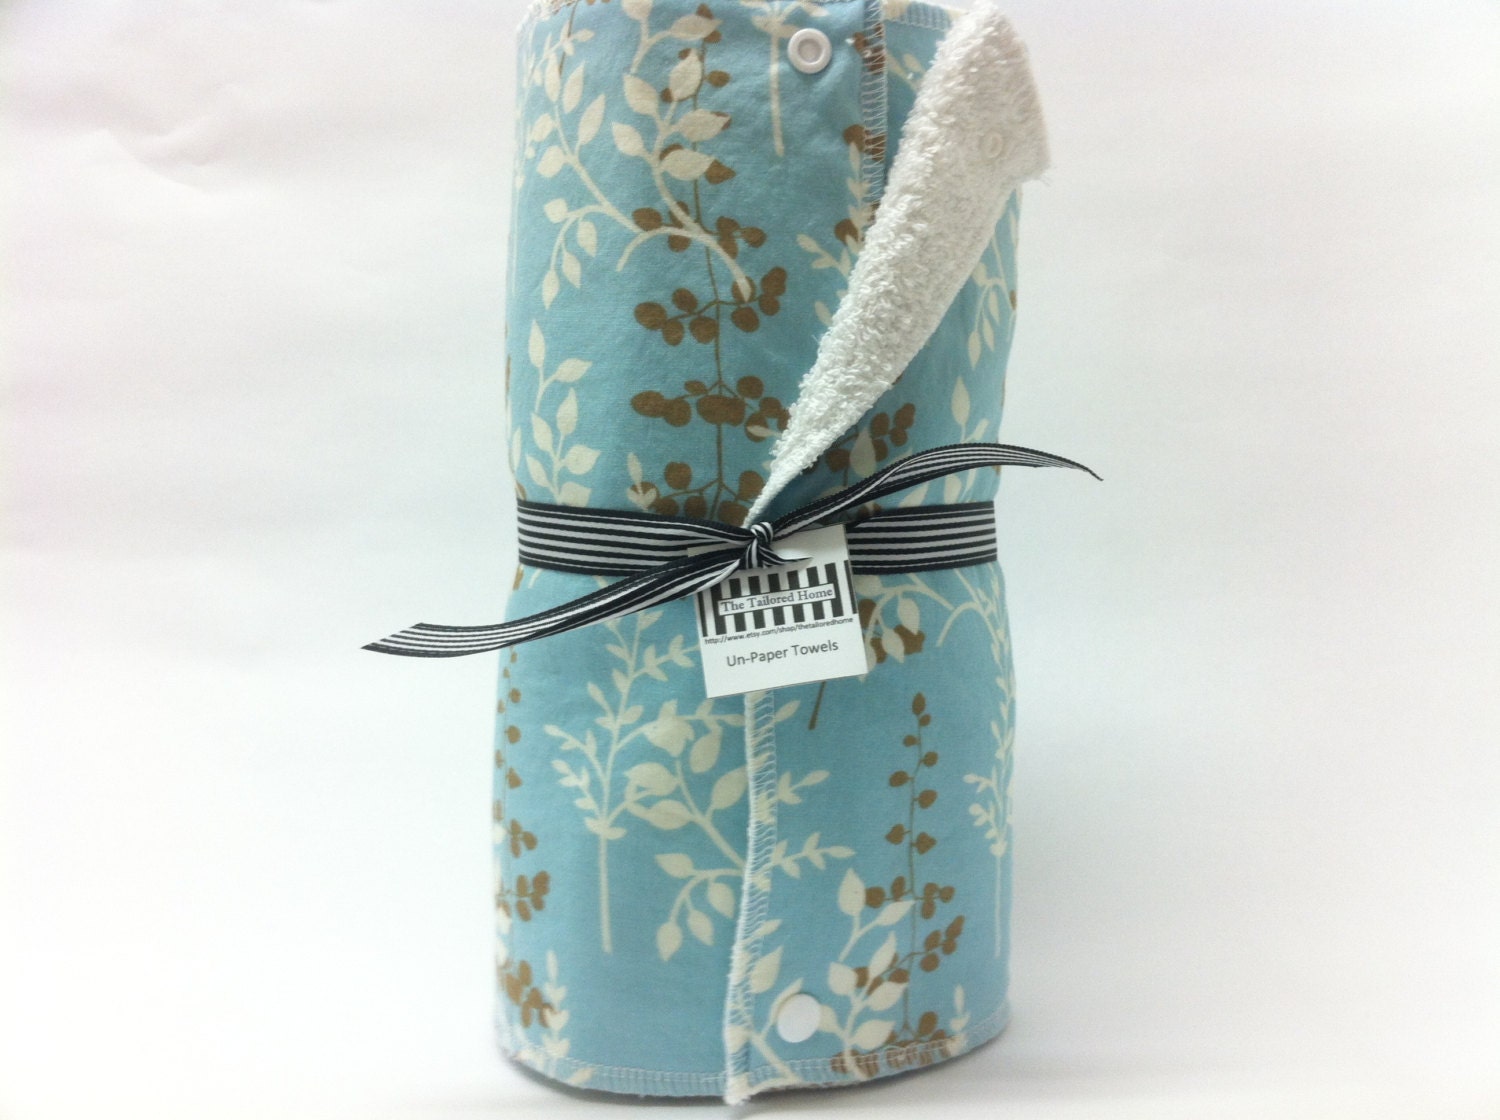 Reusable Paper Towel, Paper Towel, Cloth Paper Towel, Eco Friendly, Towels With Snaps - Enchanted Forest - TheTailoredHome